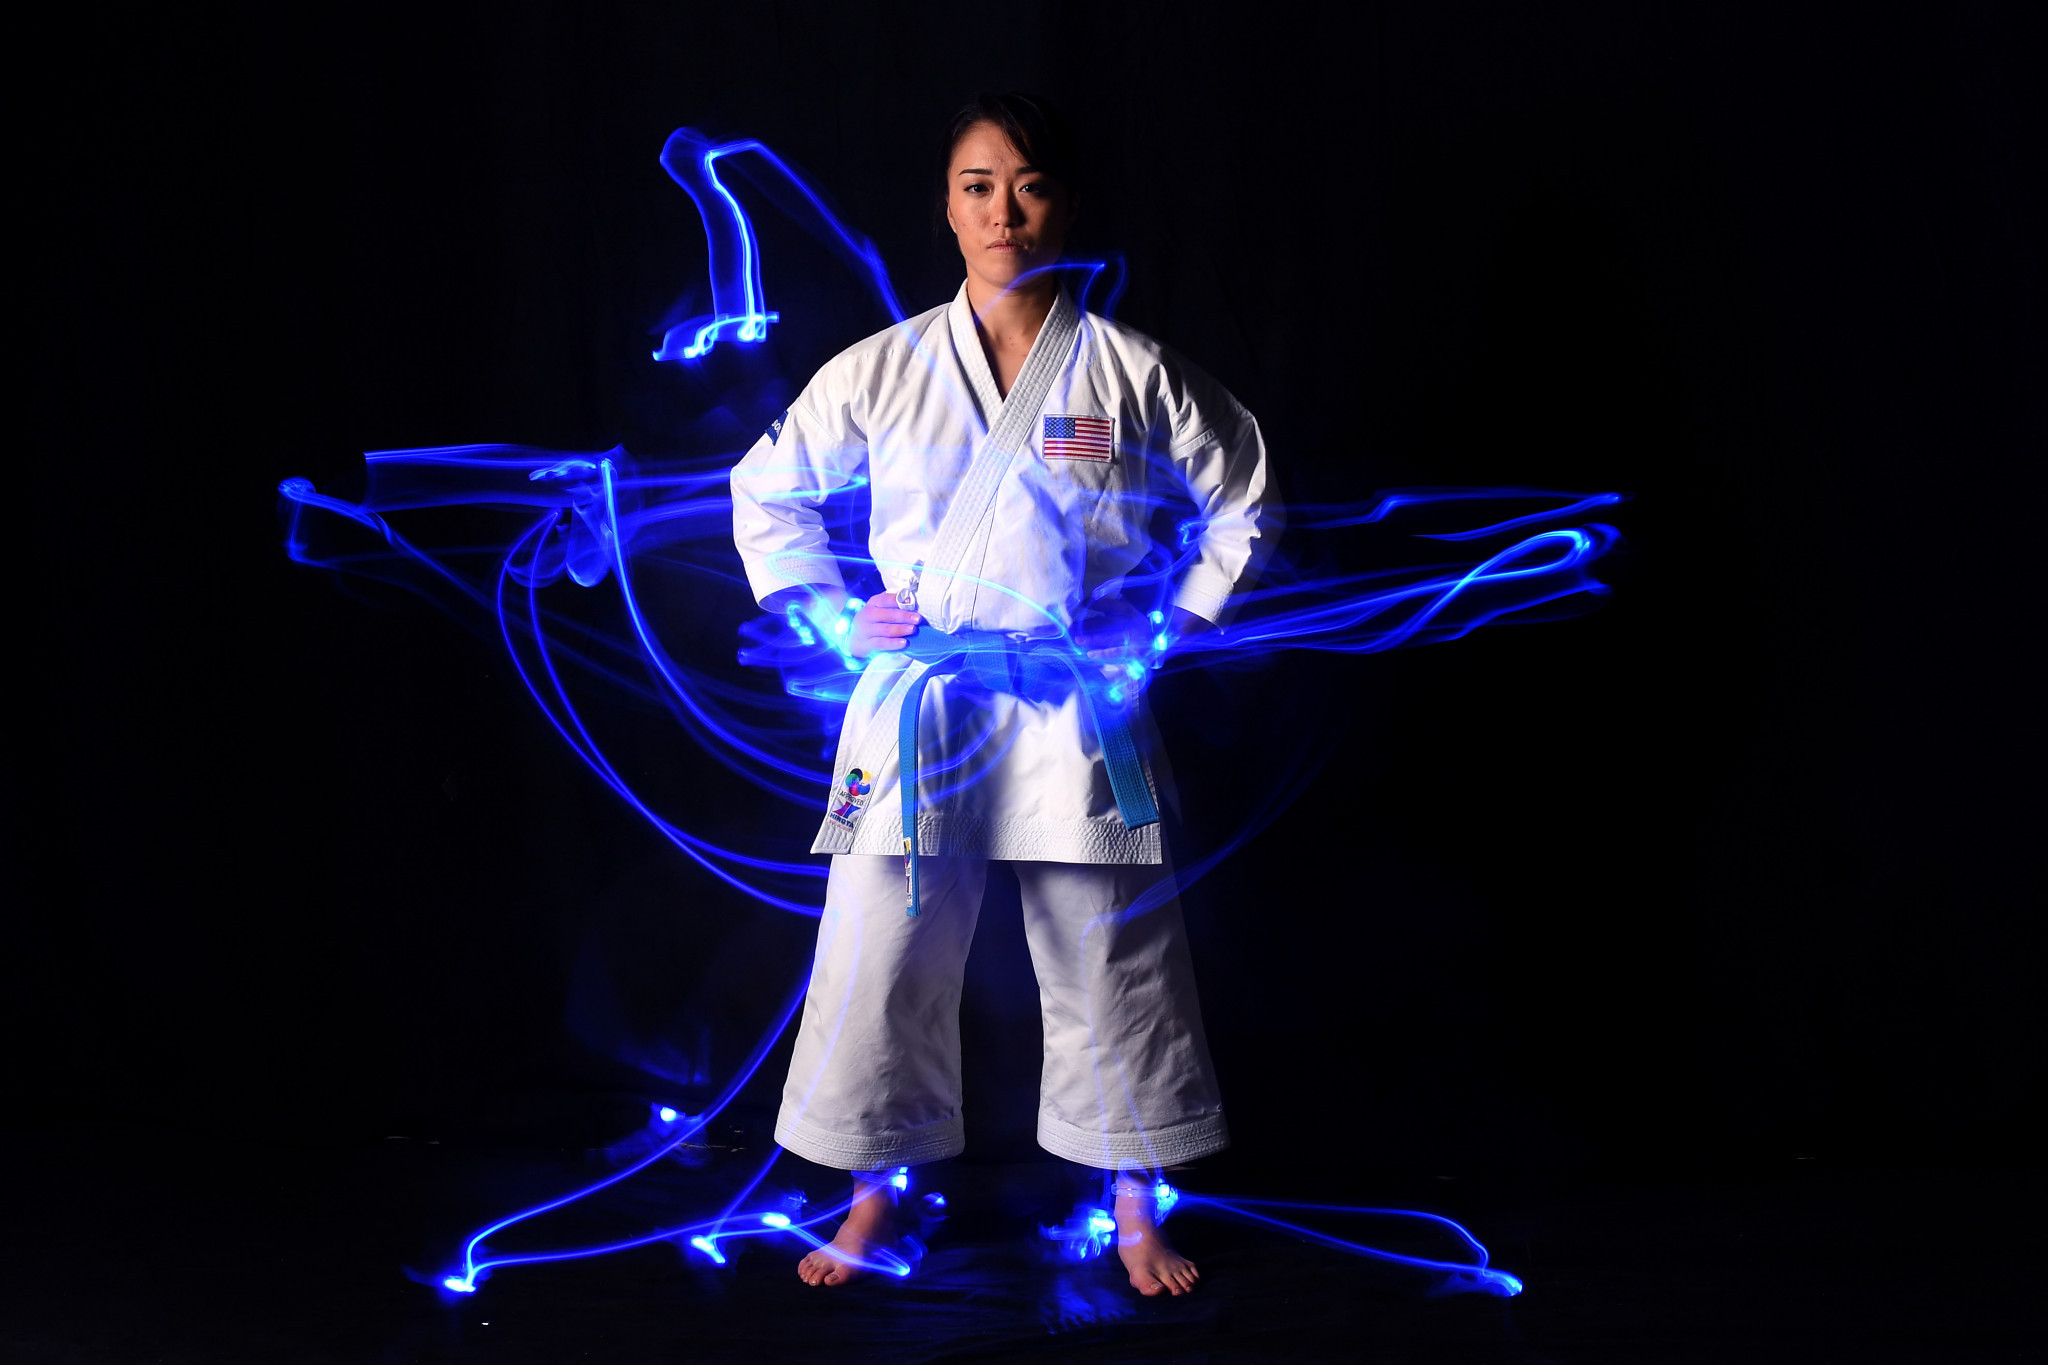 Sakura Kokumai is a seven-time US kata champion and an ambassador for the Japanese-American community  ©Getty Images